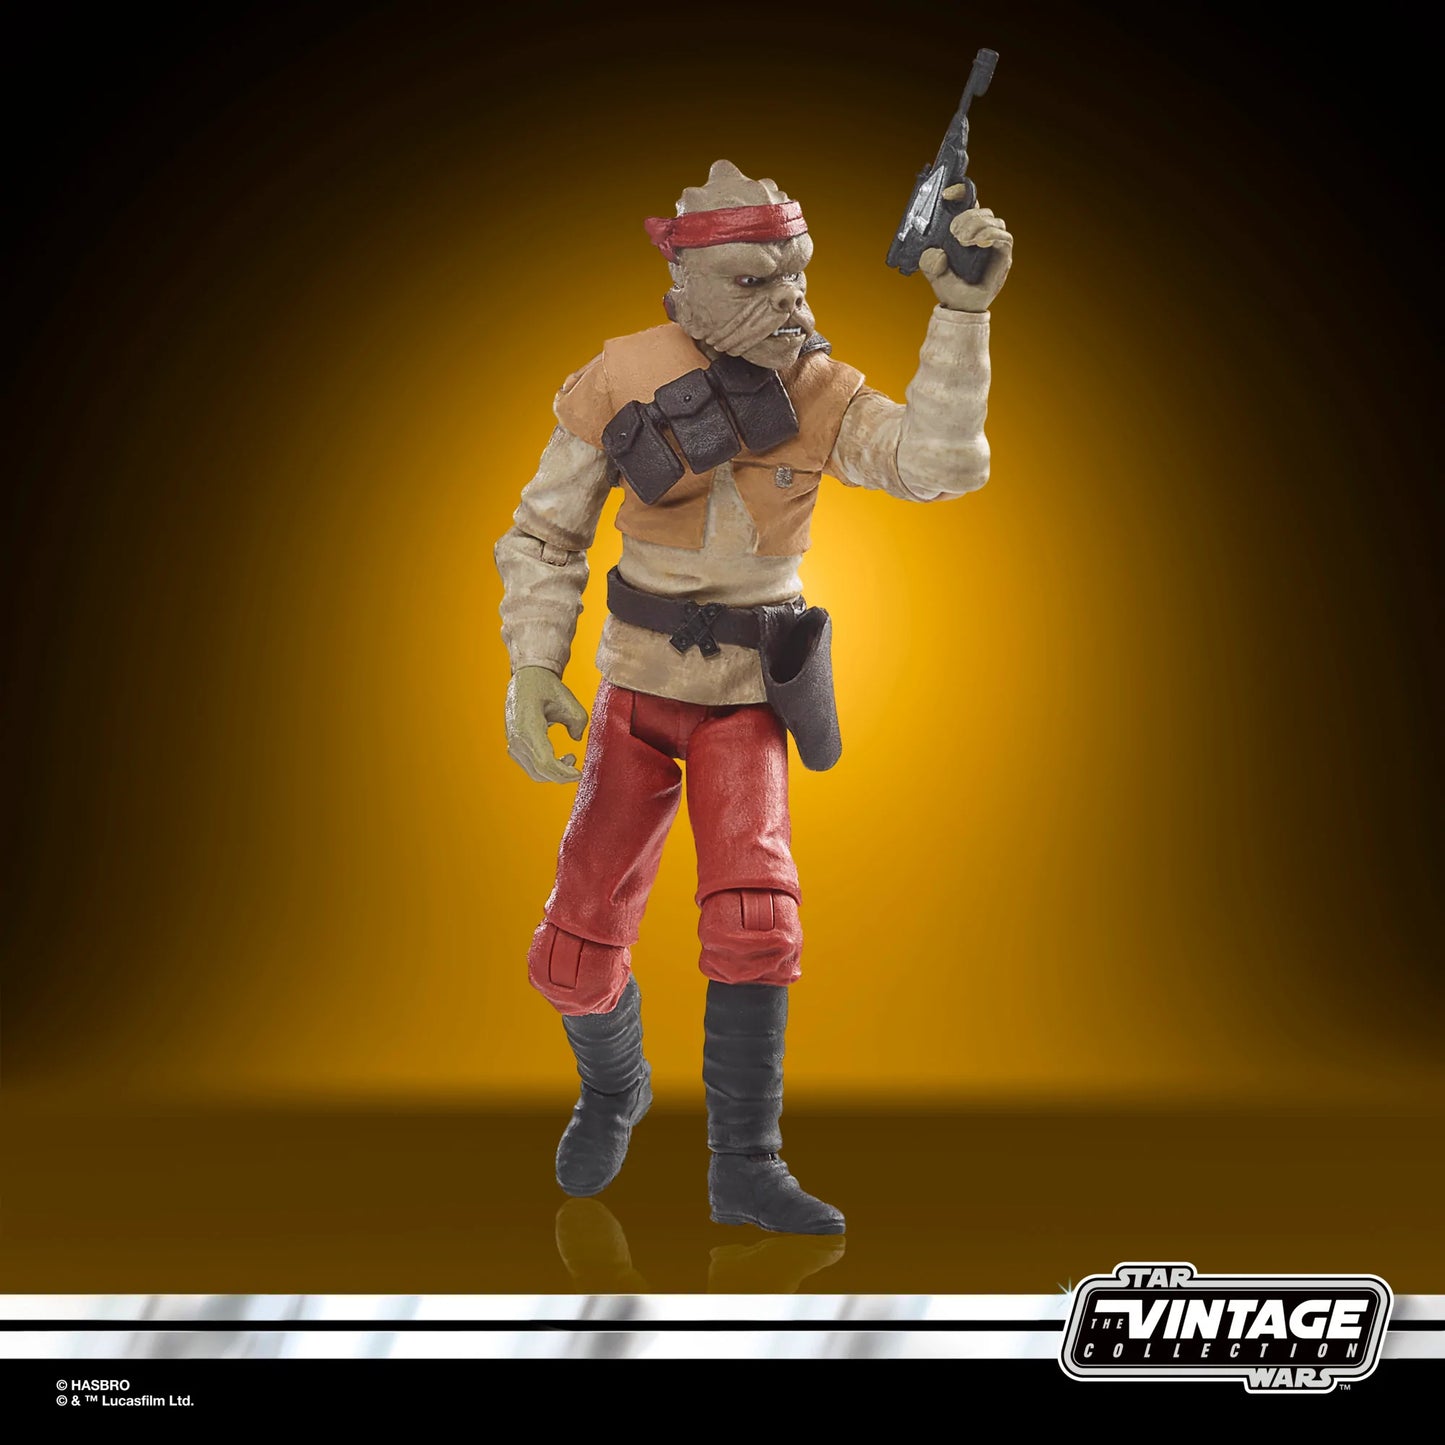 Star Wars The Vintage Collection: VC056 - Kithaba (Skiff Guard)